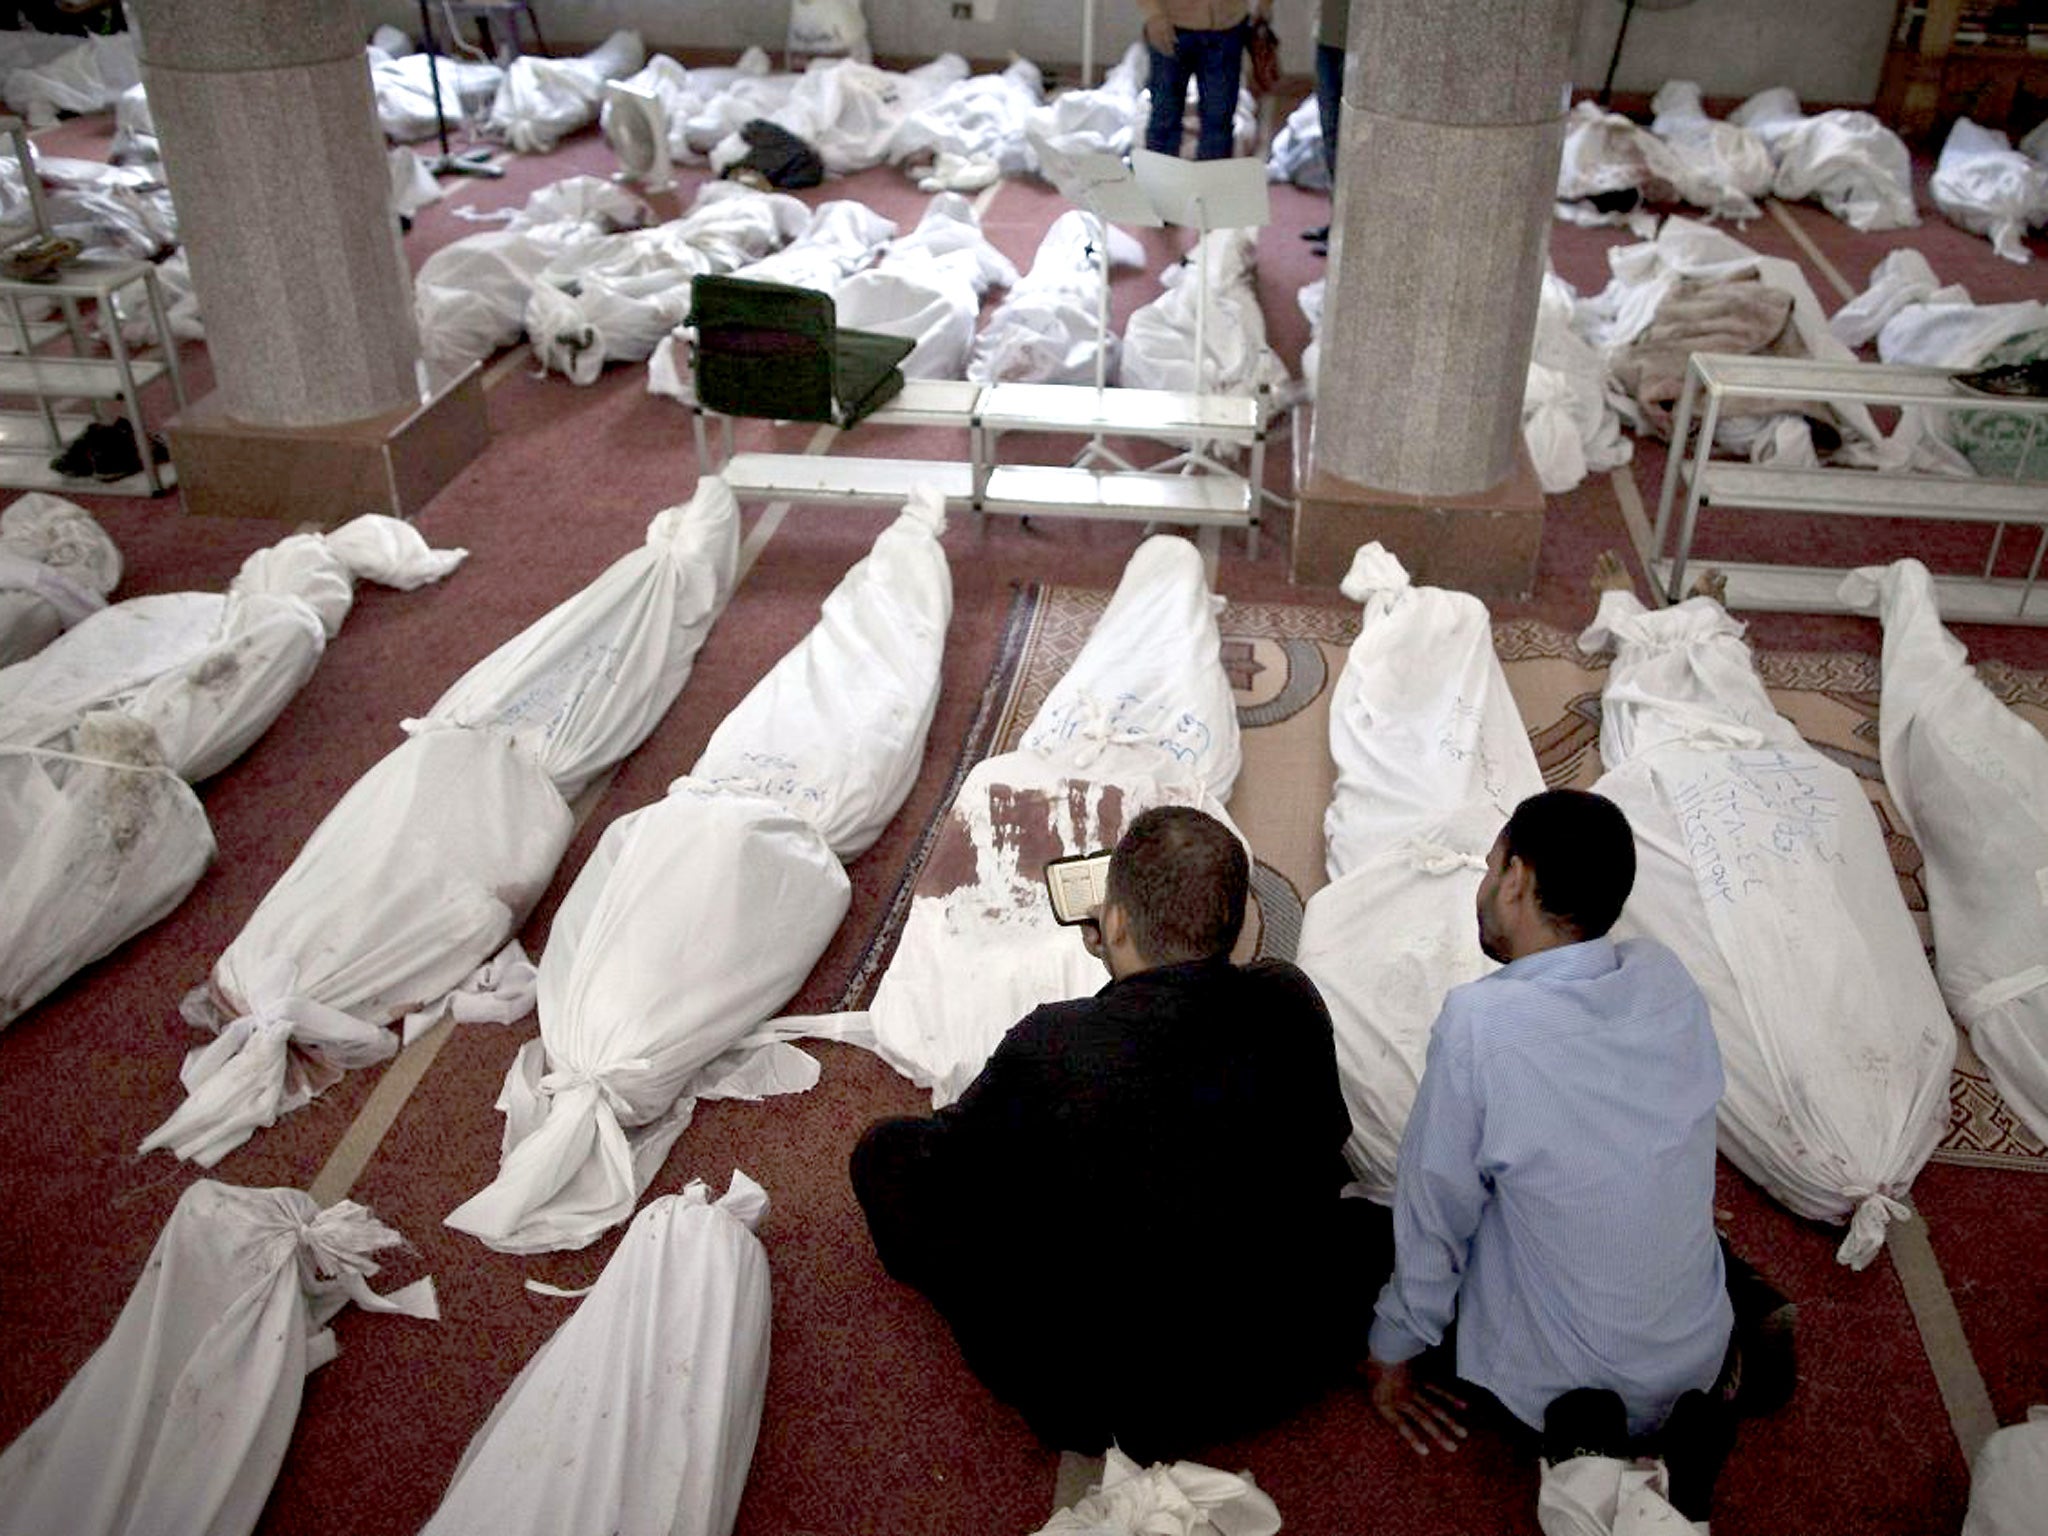 Egyptians mourn over bodies wrapped in shrouds at a mosque in Cairo on 15 August 2013